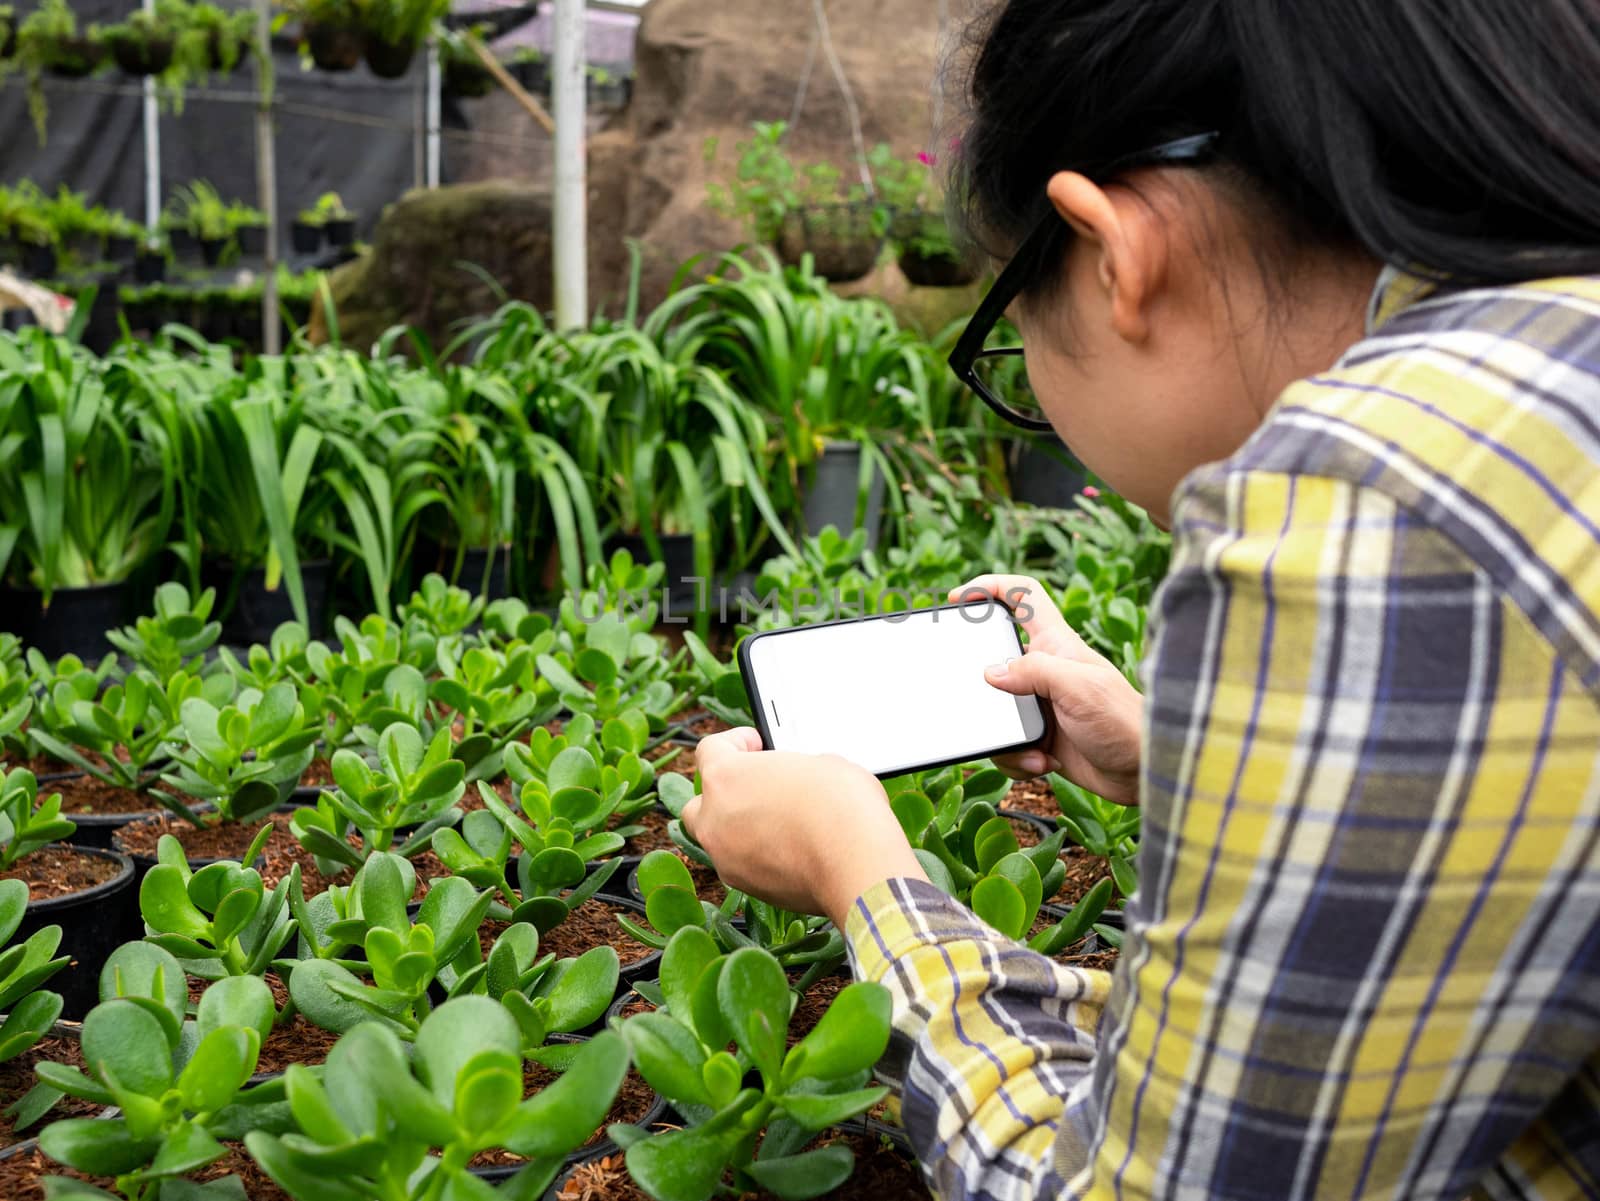 Farmer photographing seedling plants in greenhouse, using mobileFarmer photographing seedling plants in greenhouse, using mobile phone. Technology with agriculture concept. by TEERASAK